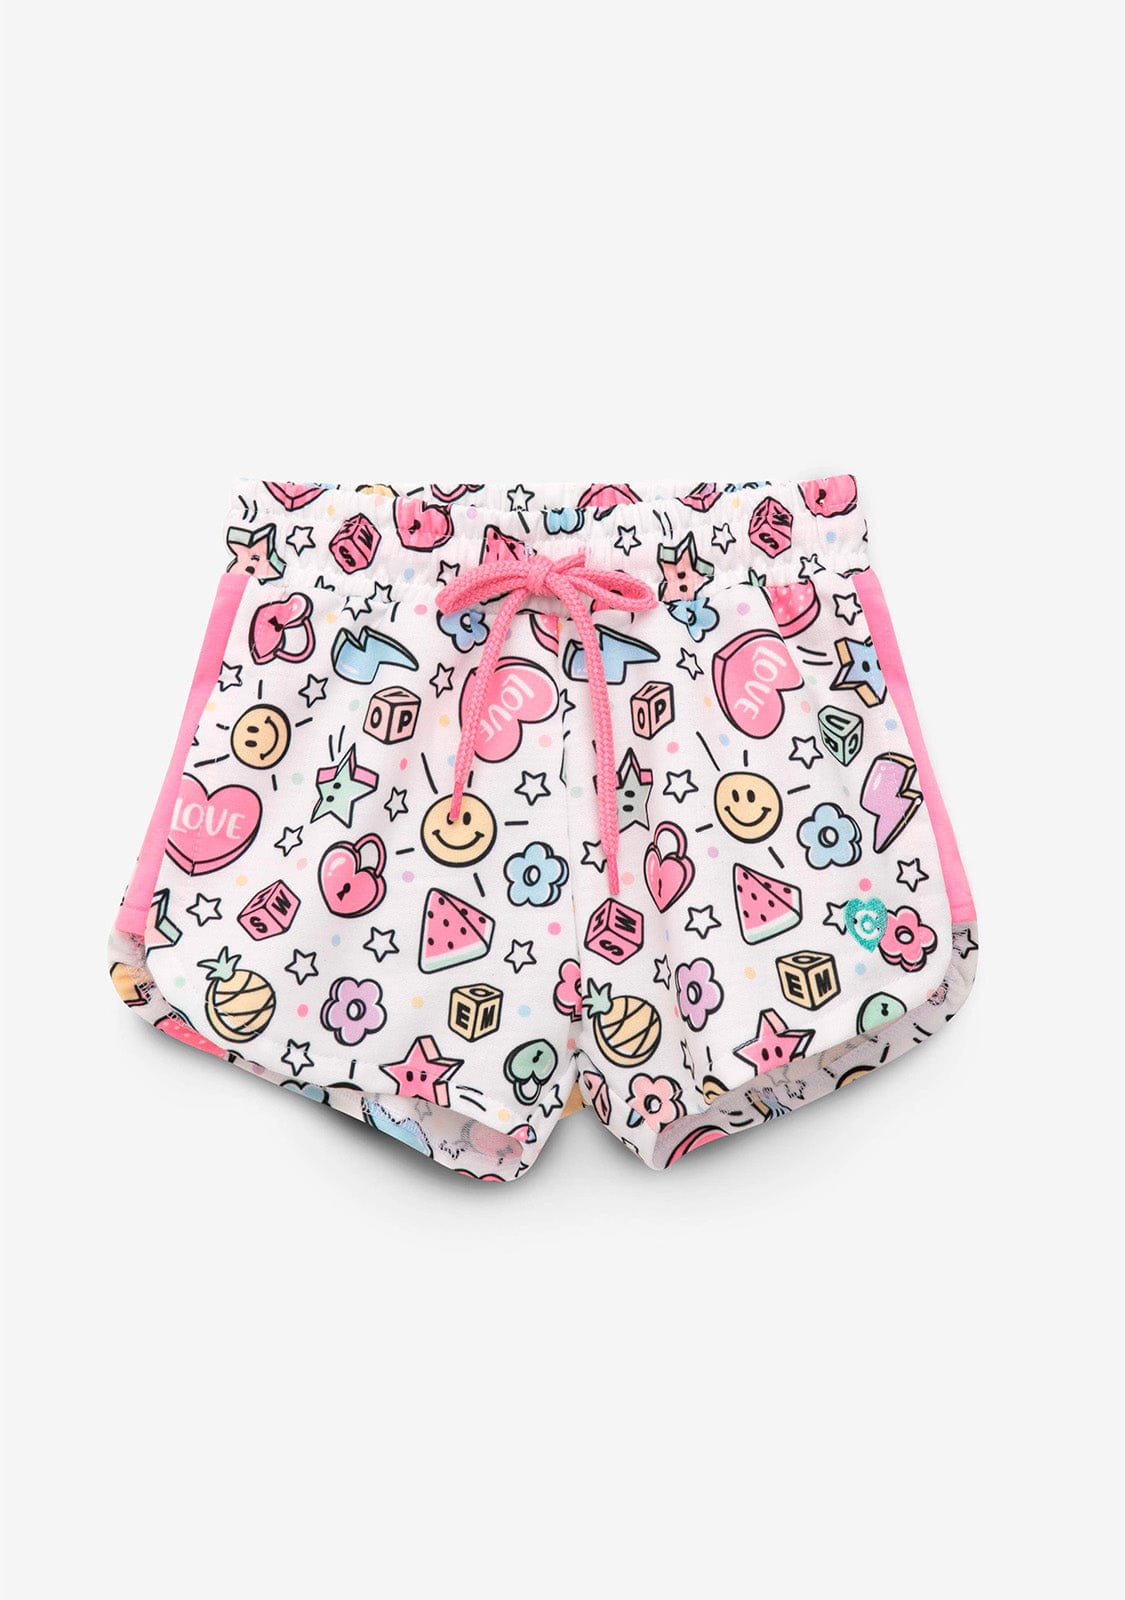 CONGUITOS TEXTIL Clothing Girl´s Colored Beads Print Plush Shorts